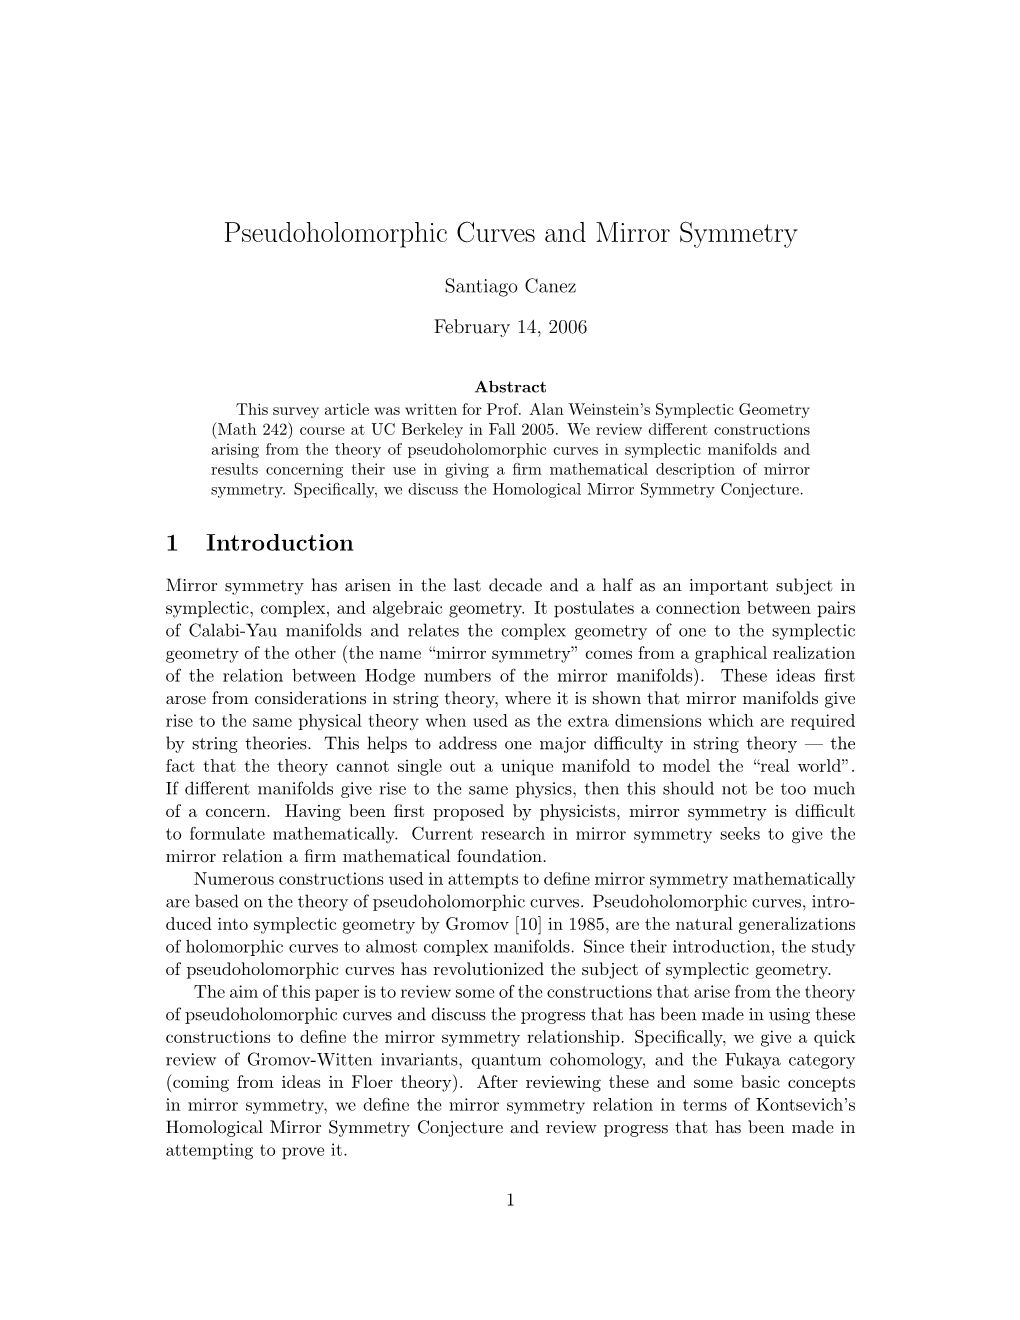 Pseudoholomorphic Curves and Mirror Symmetry